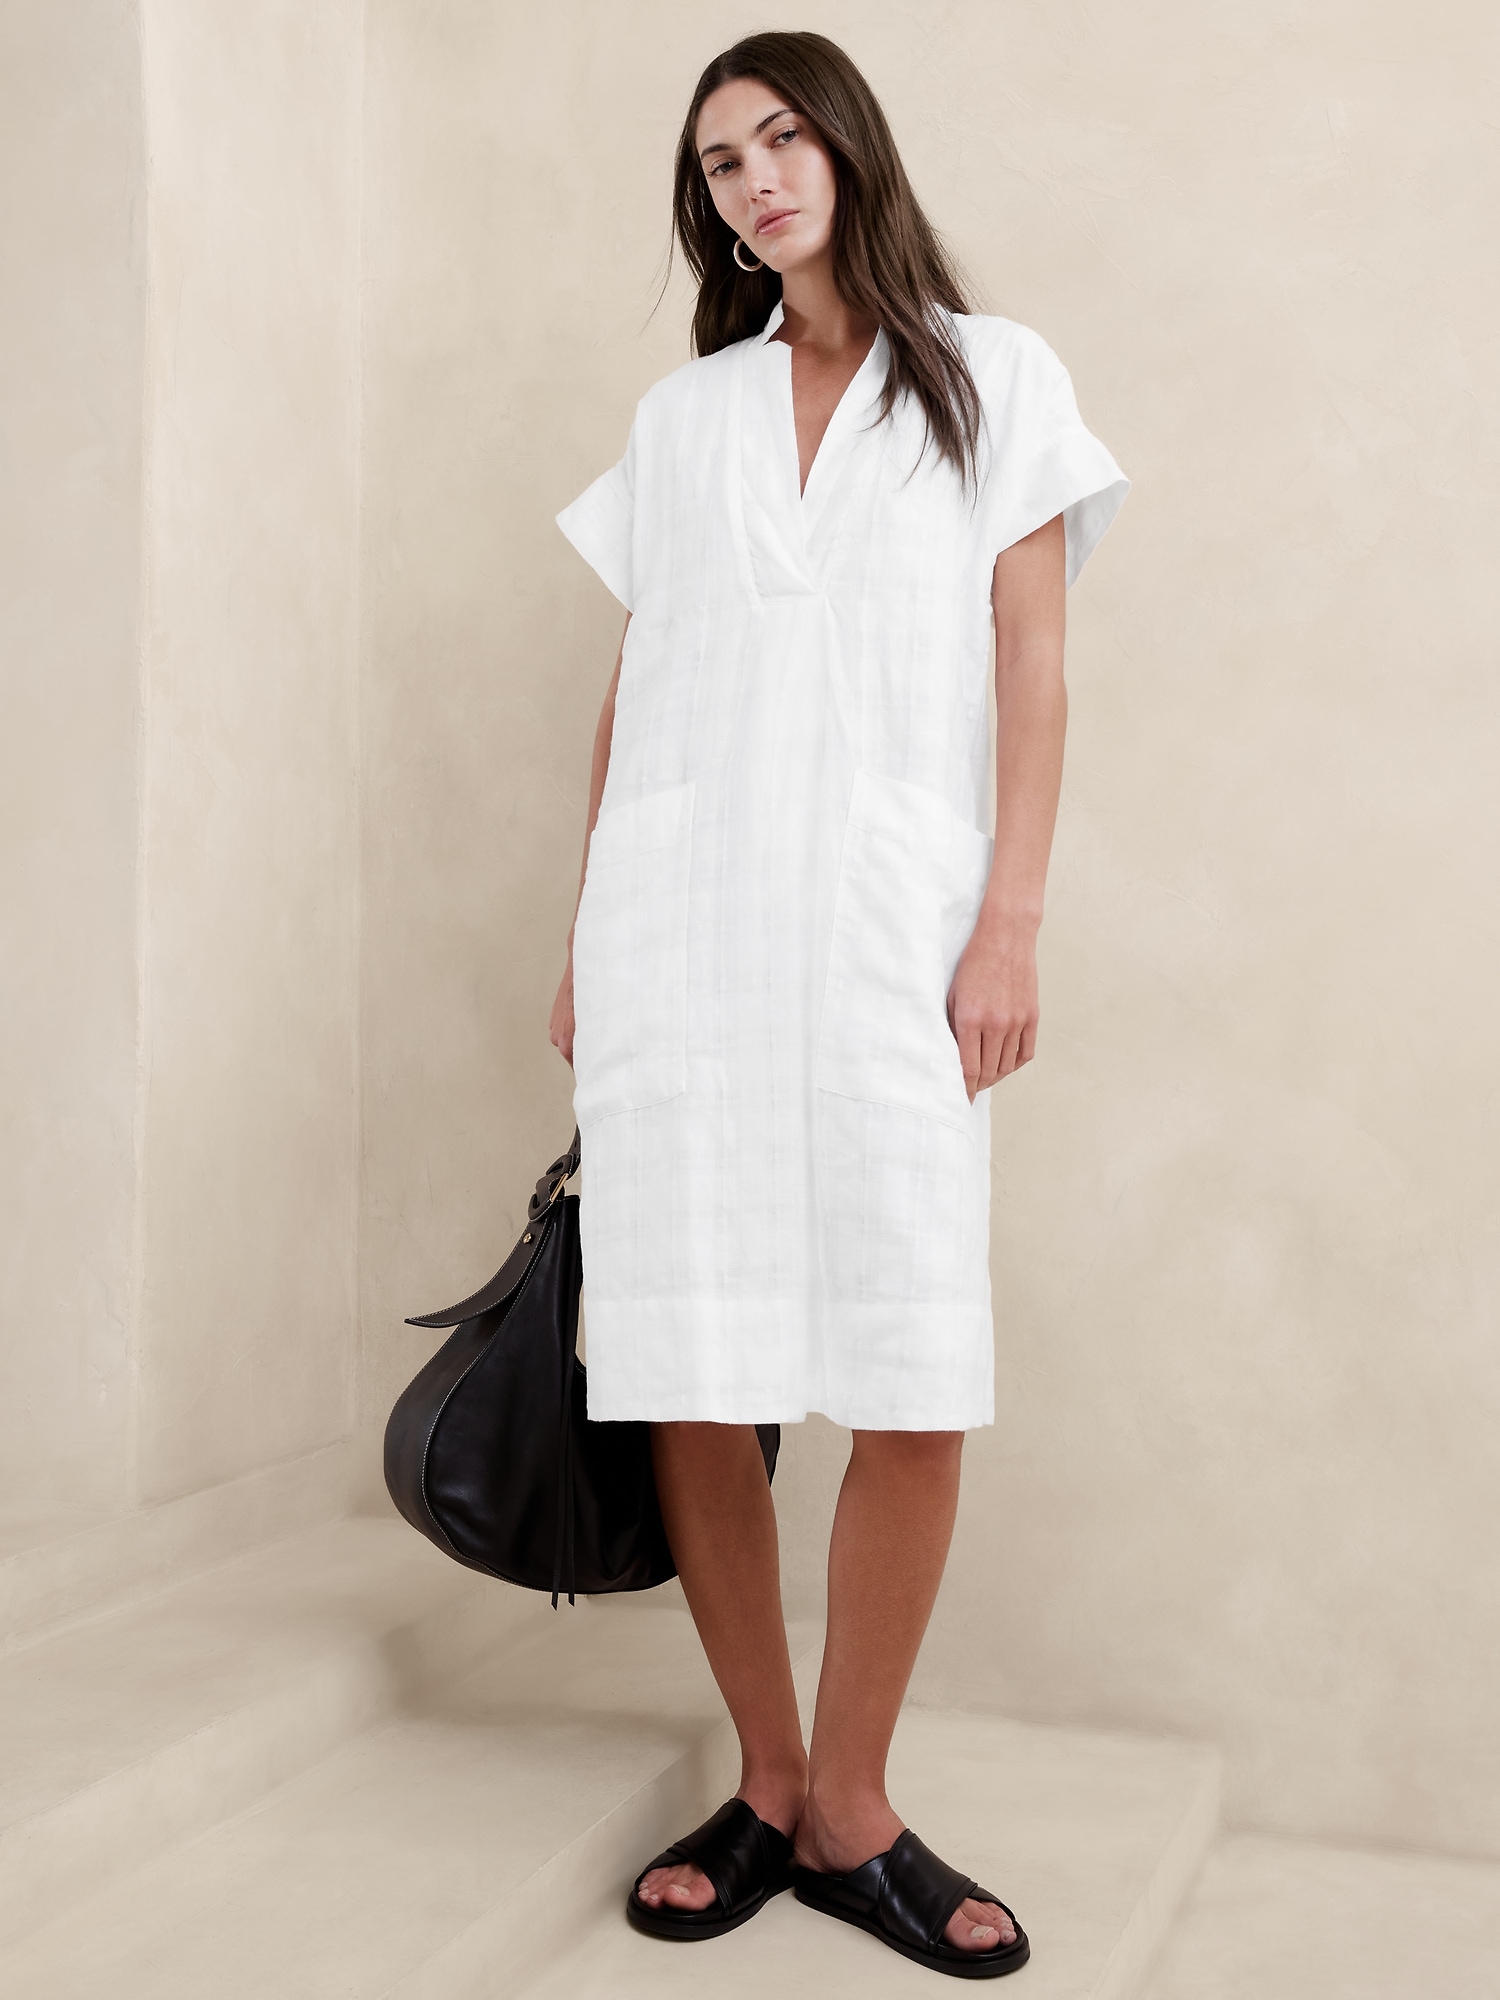 COS - A new take on the shirt dress. Designed with utility